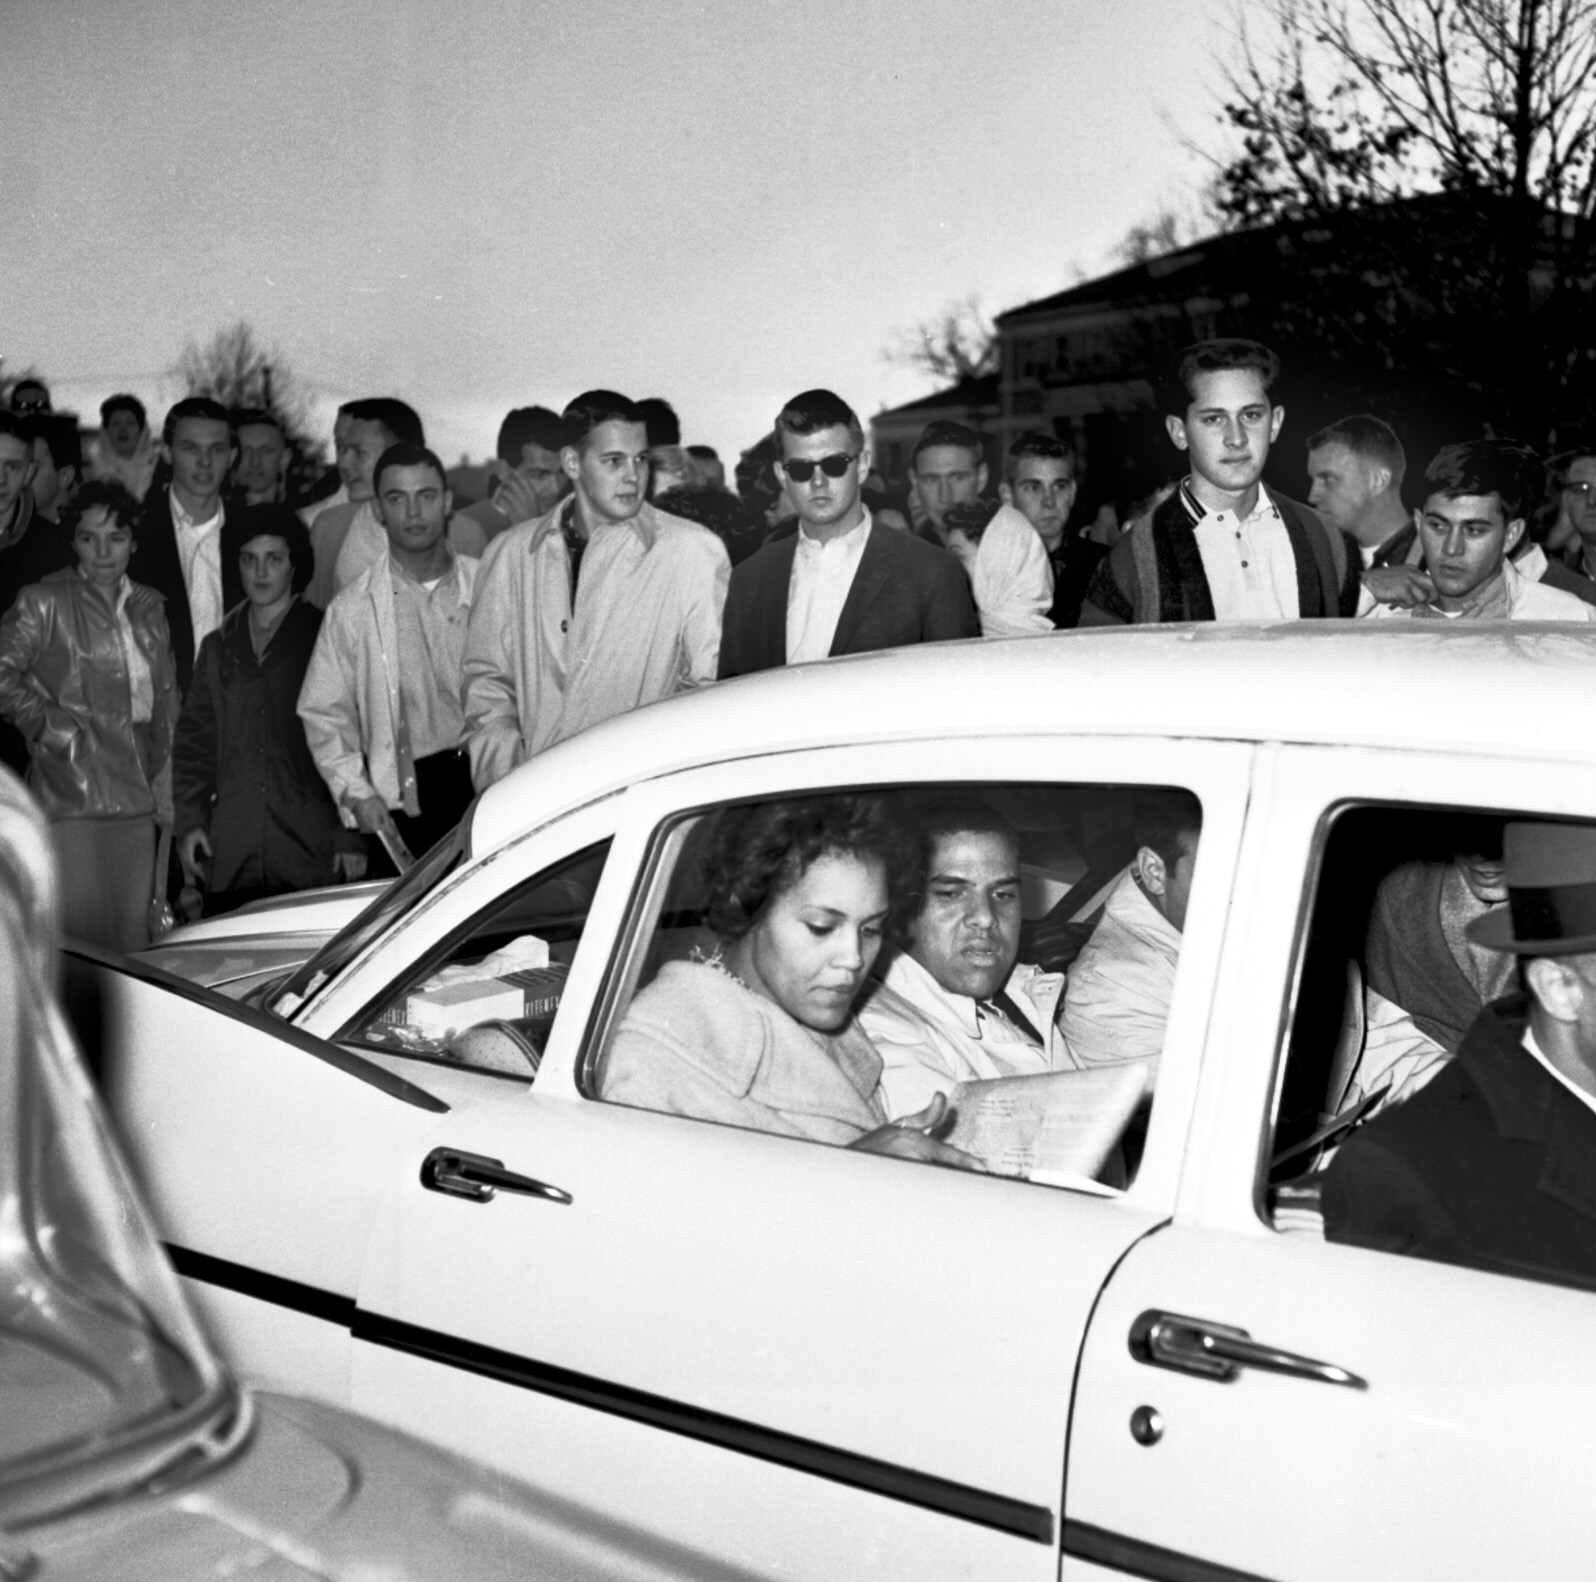 University of Georgia students shout and jeer in this 1961 photo at Charlayne Hunter, 18, left, and Hamilton Holmes, 19, as they leave the administration building after completing registration at Athens, Ga.  Admitted under federal court order, they will become the first black students to attend the university in its 175-year history.